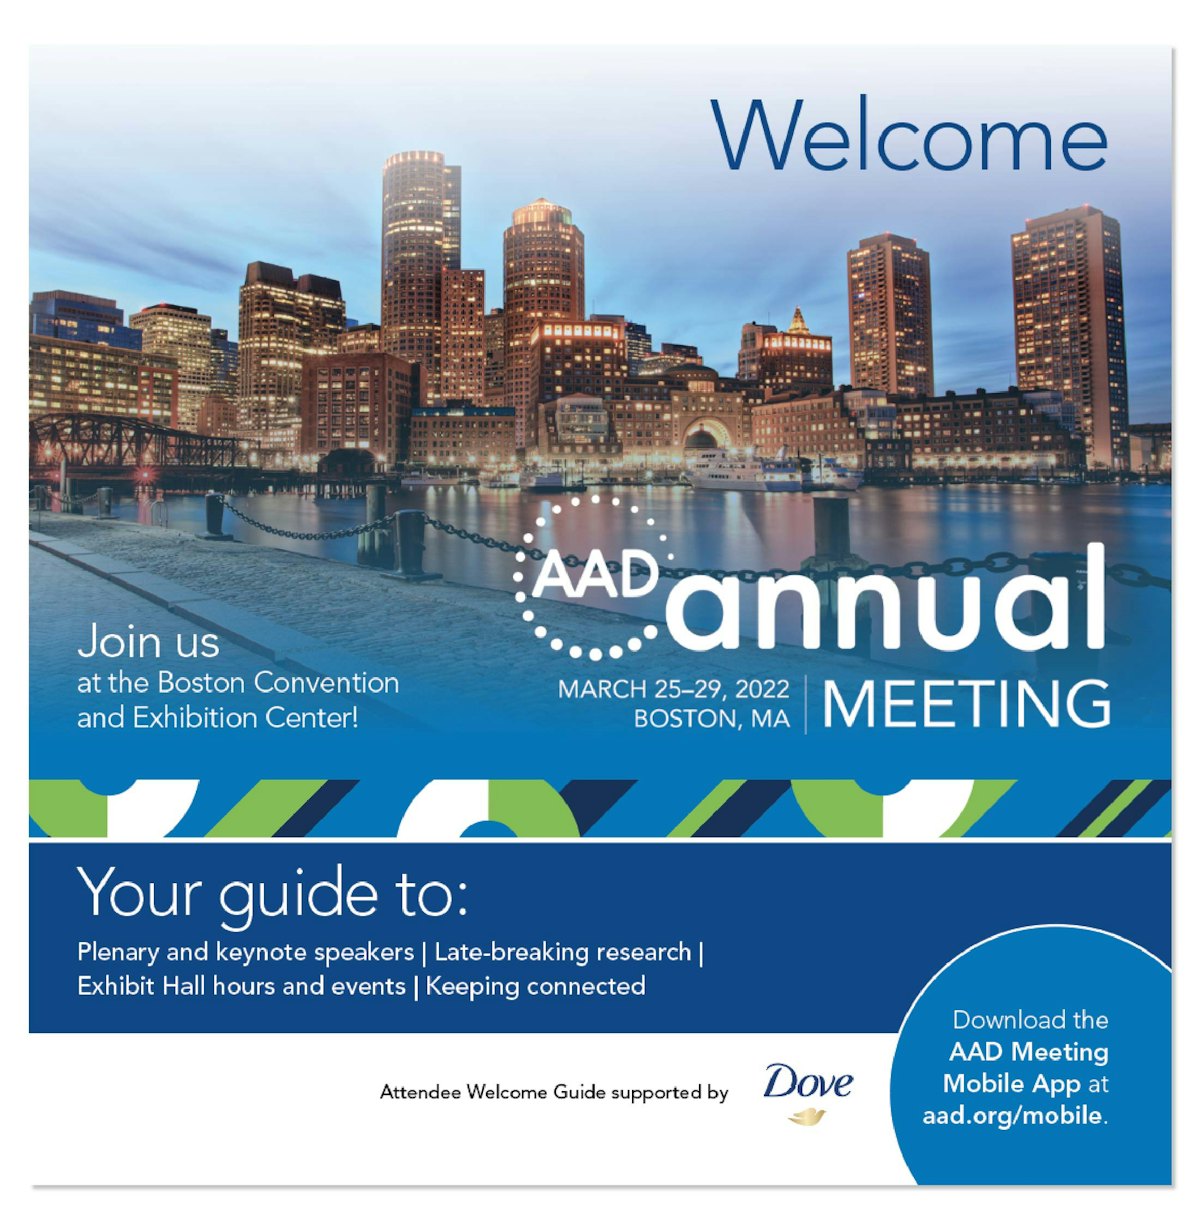 View the AAD Annual Meeting 2022 Guide for helpful tools to